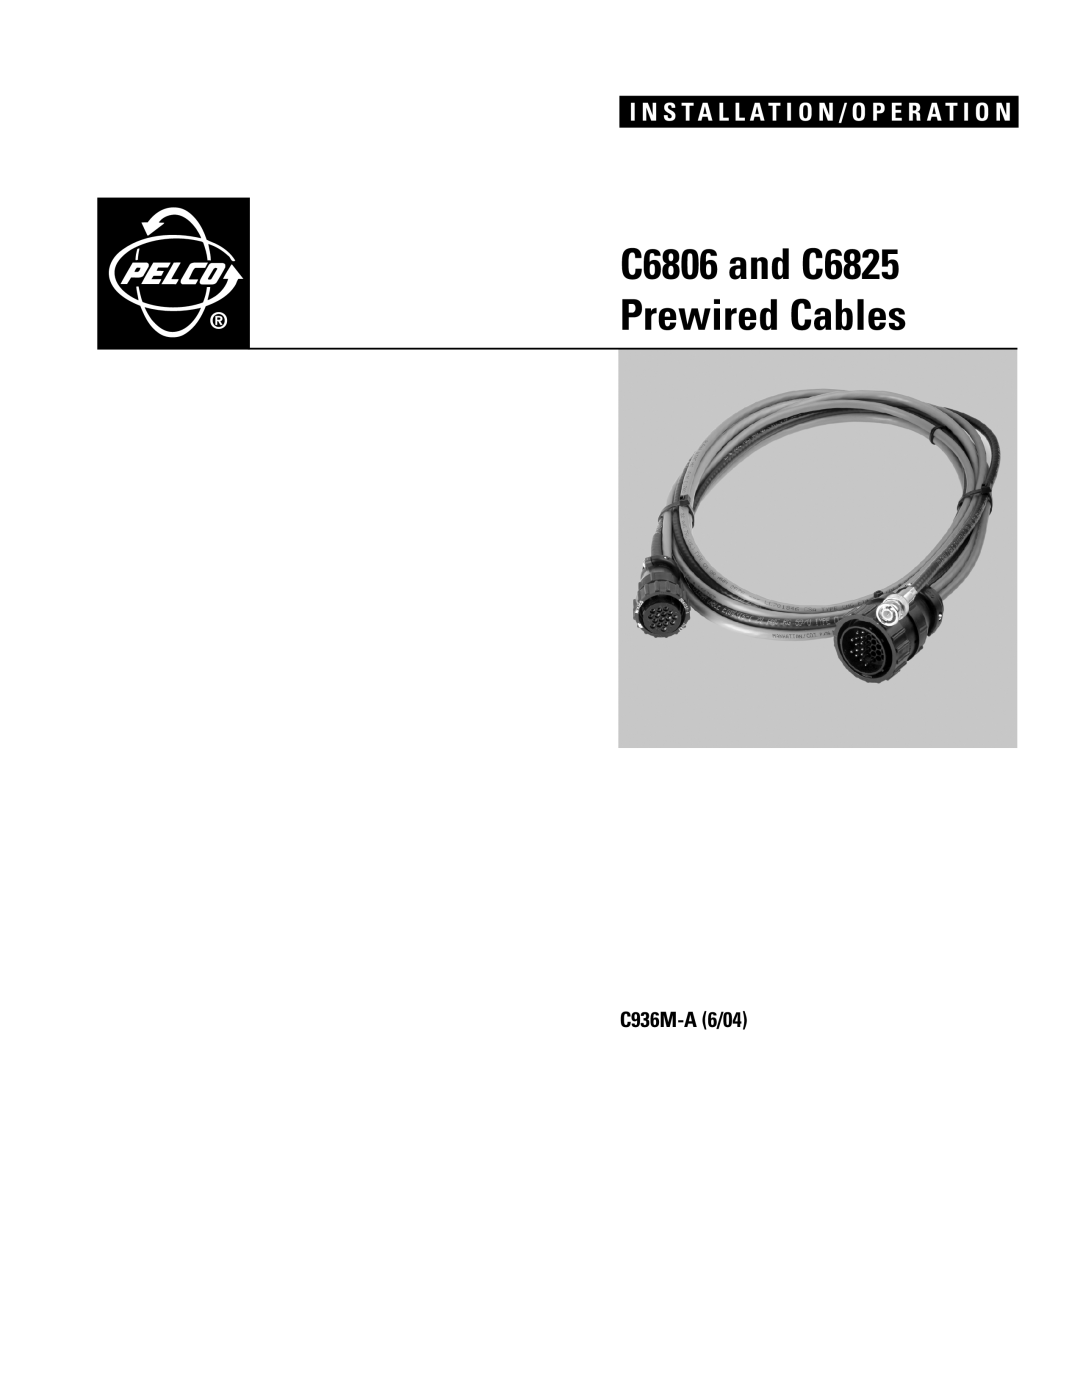 Pelco manual C936M-A 6/04, C6806 and C6825, Prewired Cables, I N S T A L L A T I O N / O P E R A T I O N 